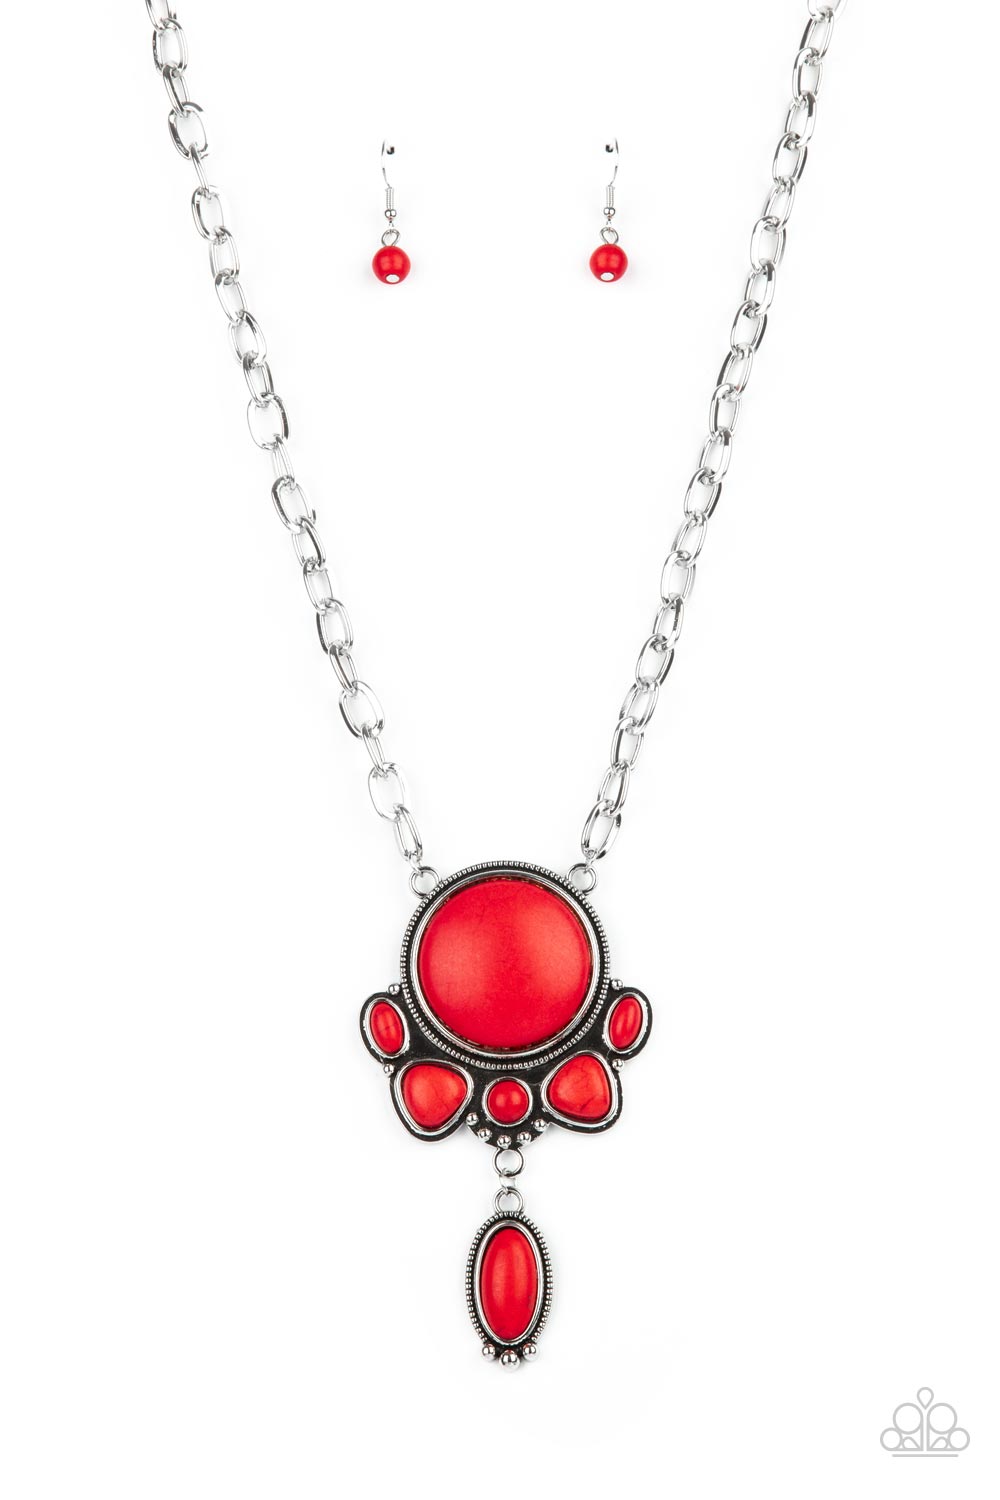 Paparazzi Accessories Geographically Gorgeous - Red Necklaces a large red stone encased in a studded silver frame swings dramatically from a heavy silver chain with oversized links. A collection of red stones wraps around the bottom of the large pendant, with an elongated oval stone swaying below them. Features an adjustable clasp closure.  Sold as one individual necklace. Includes one pair of matching earrings.  Paparazzi Jewelry is lead and nickel free so it's perfect for sensitive skin too!